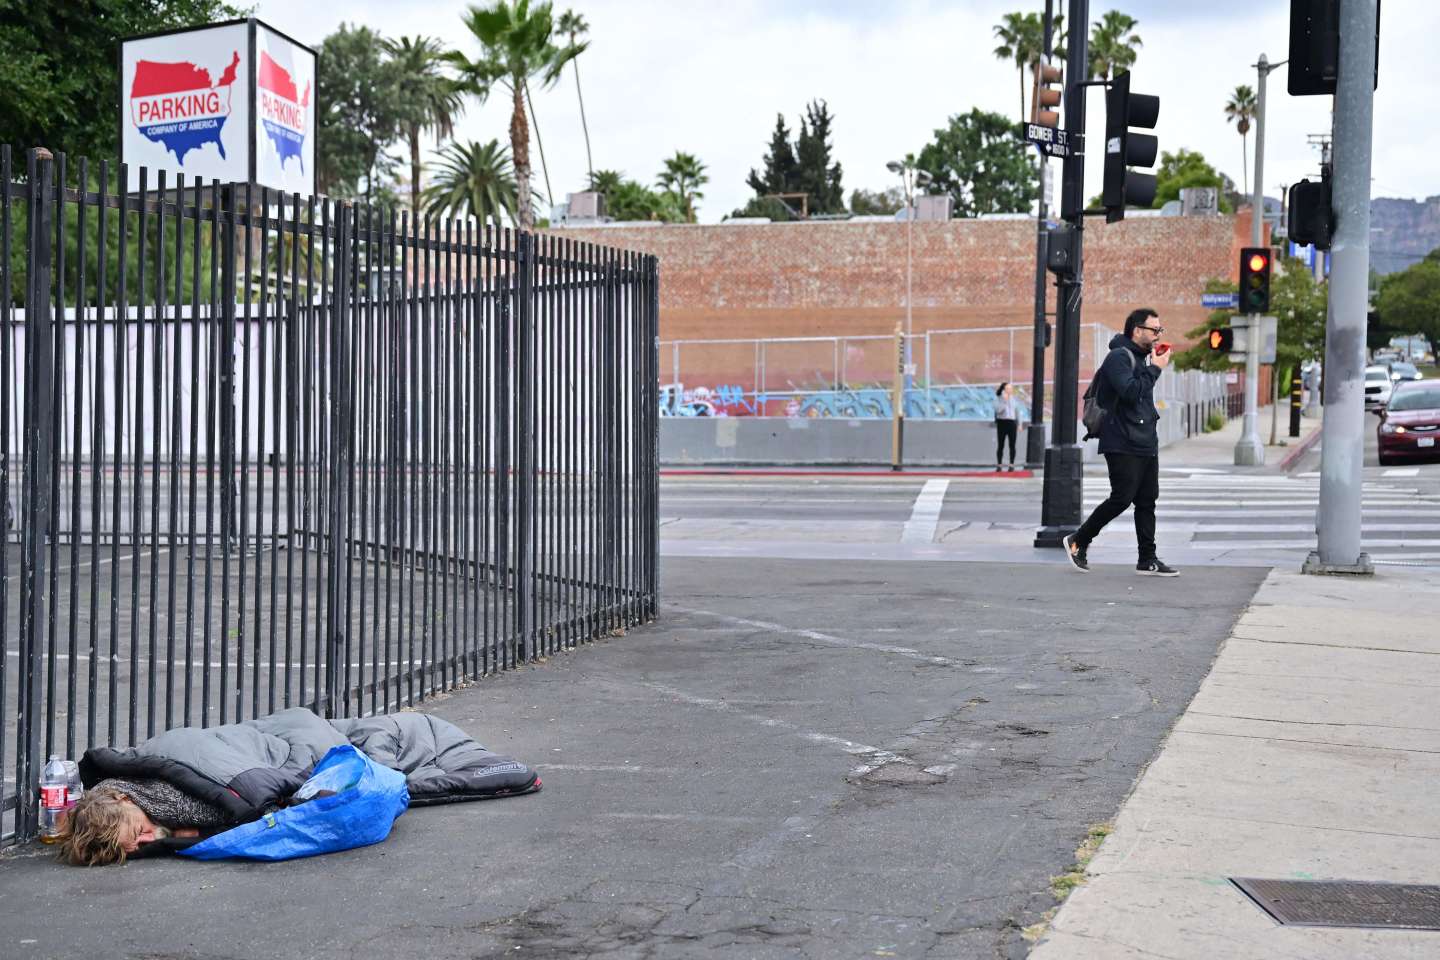 New Los Angeles mayor declares state of emergency over homeless crisis

